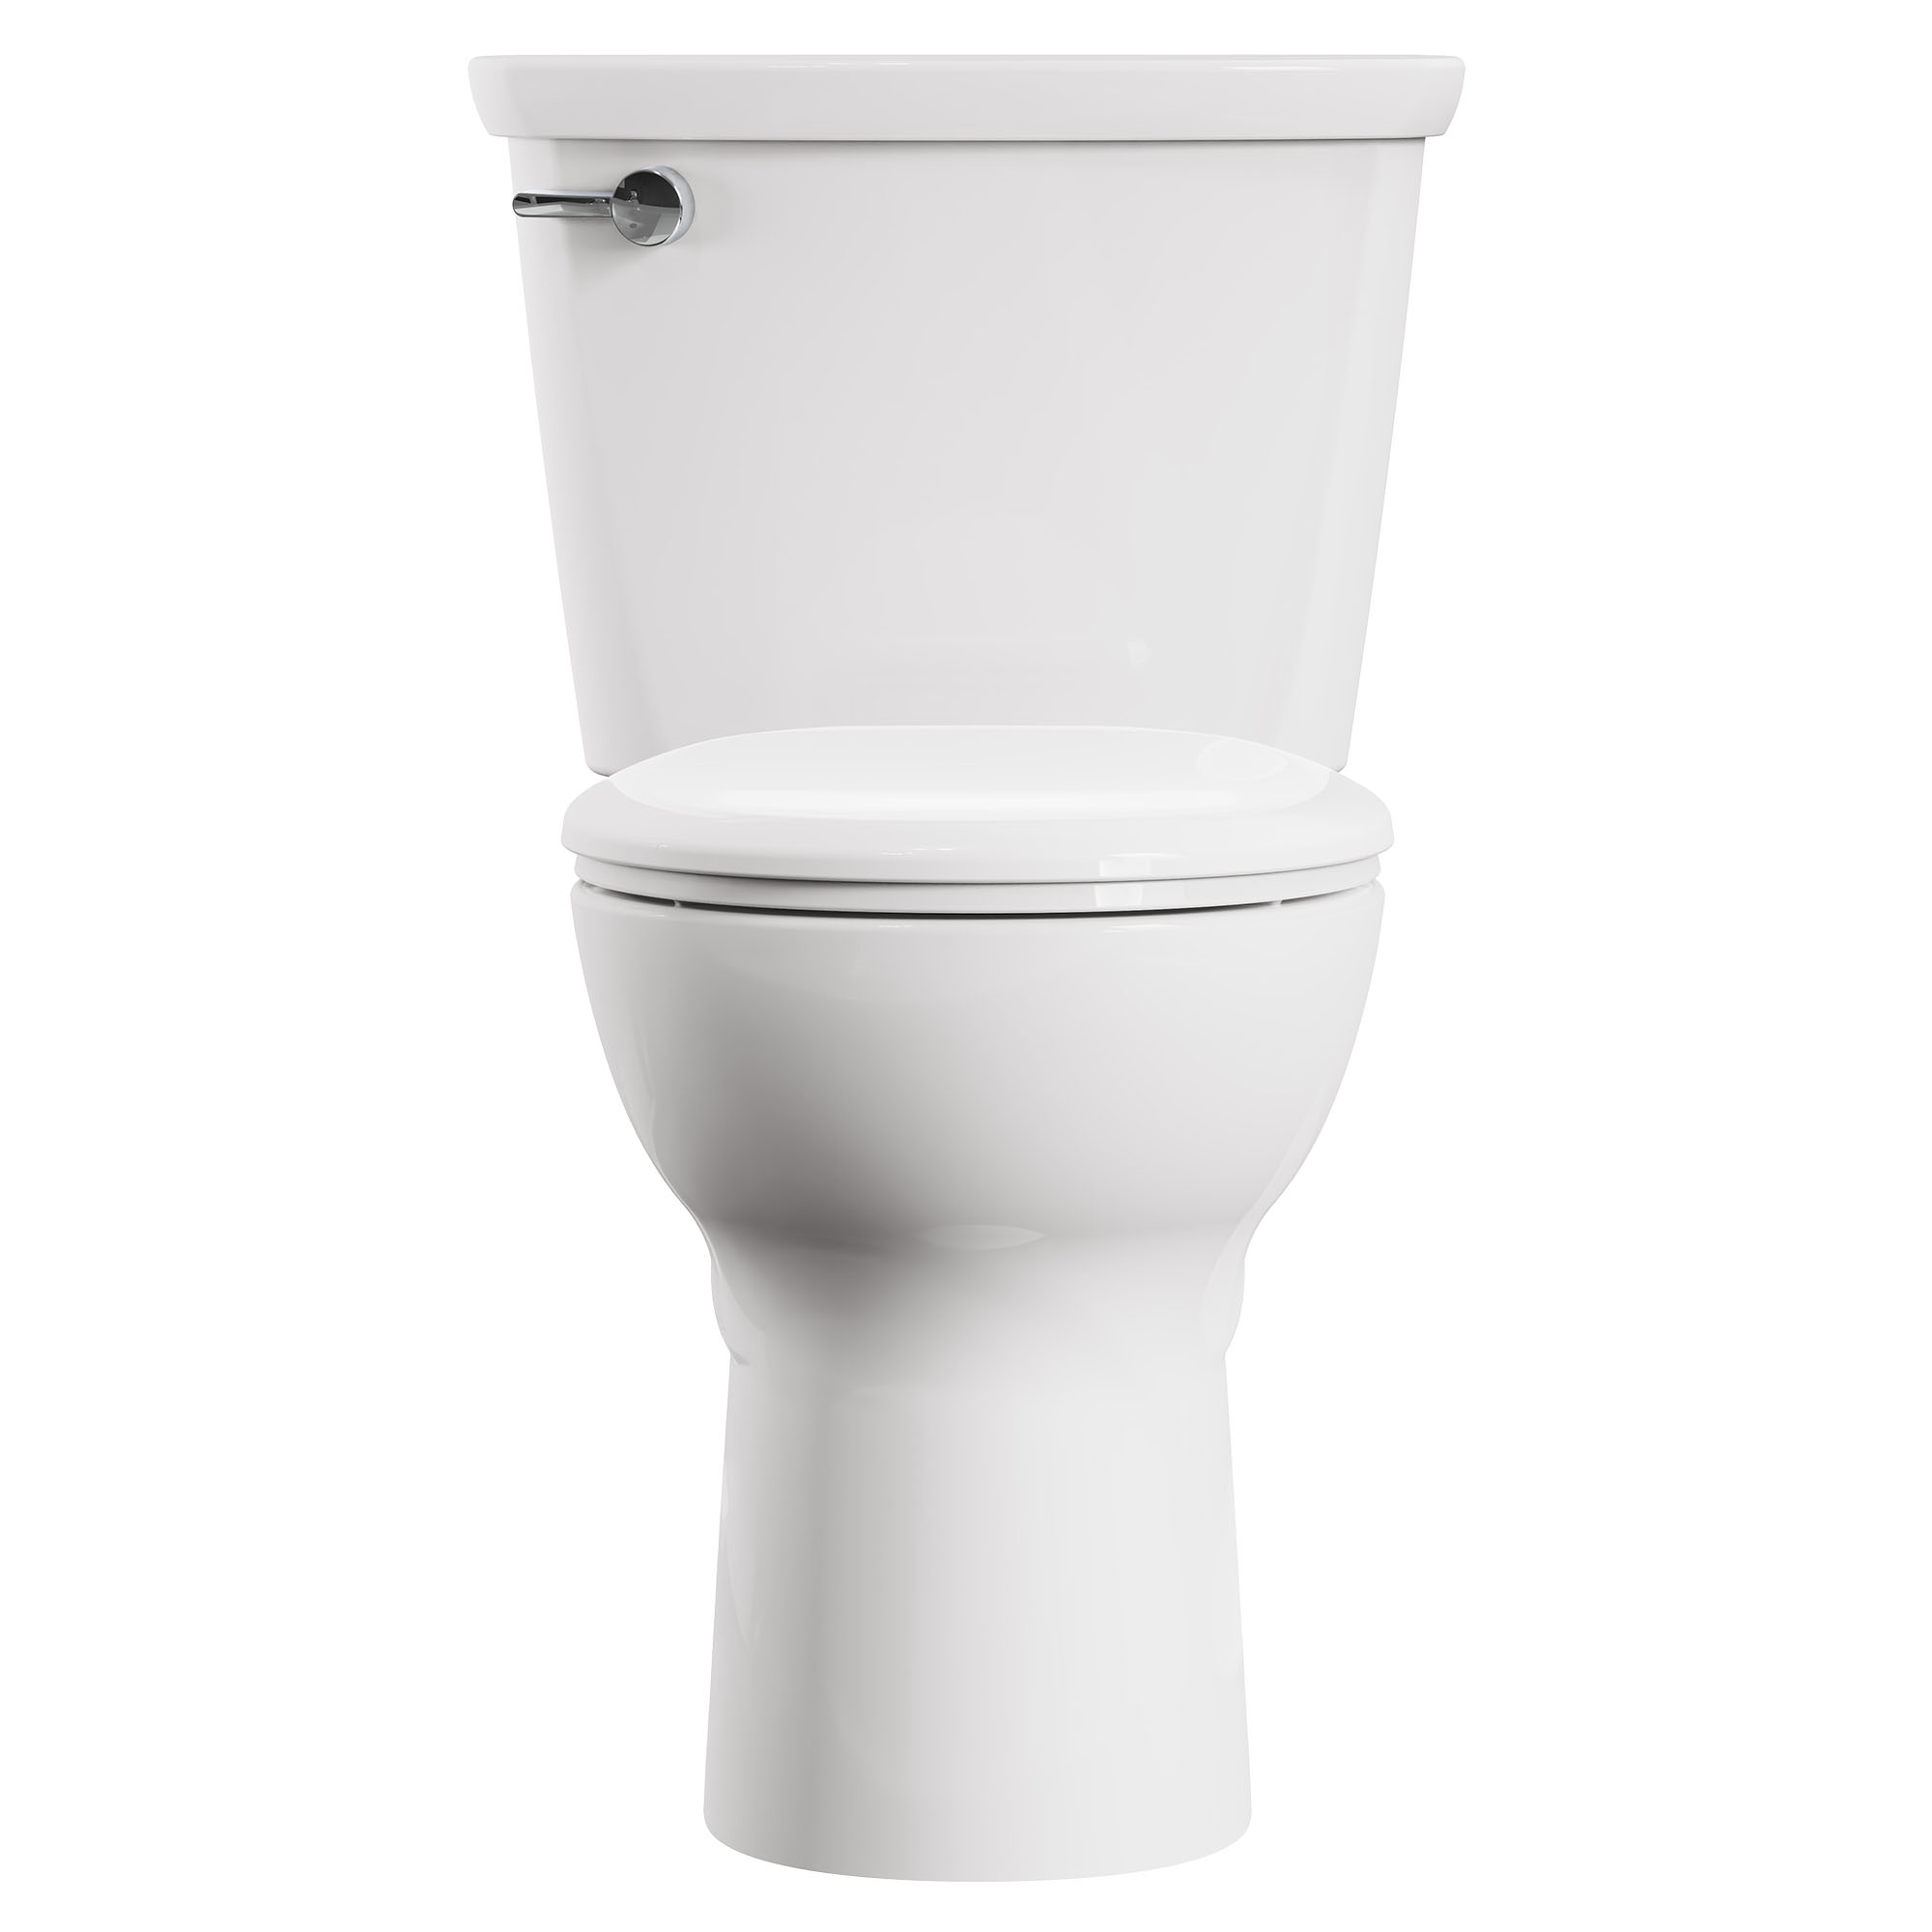 Cadet® PRO Two-Piece 1.6 gpf/6.0 Lpf Chair Height Round Front 10-Inch Rough Toilet Less Seat